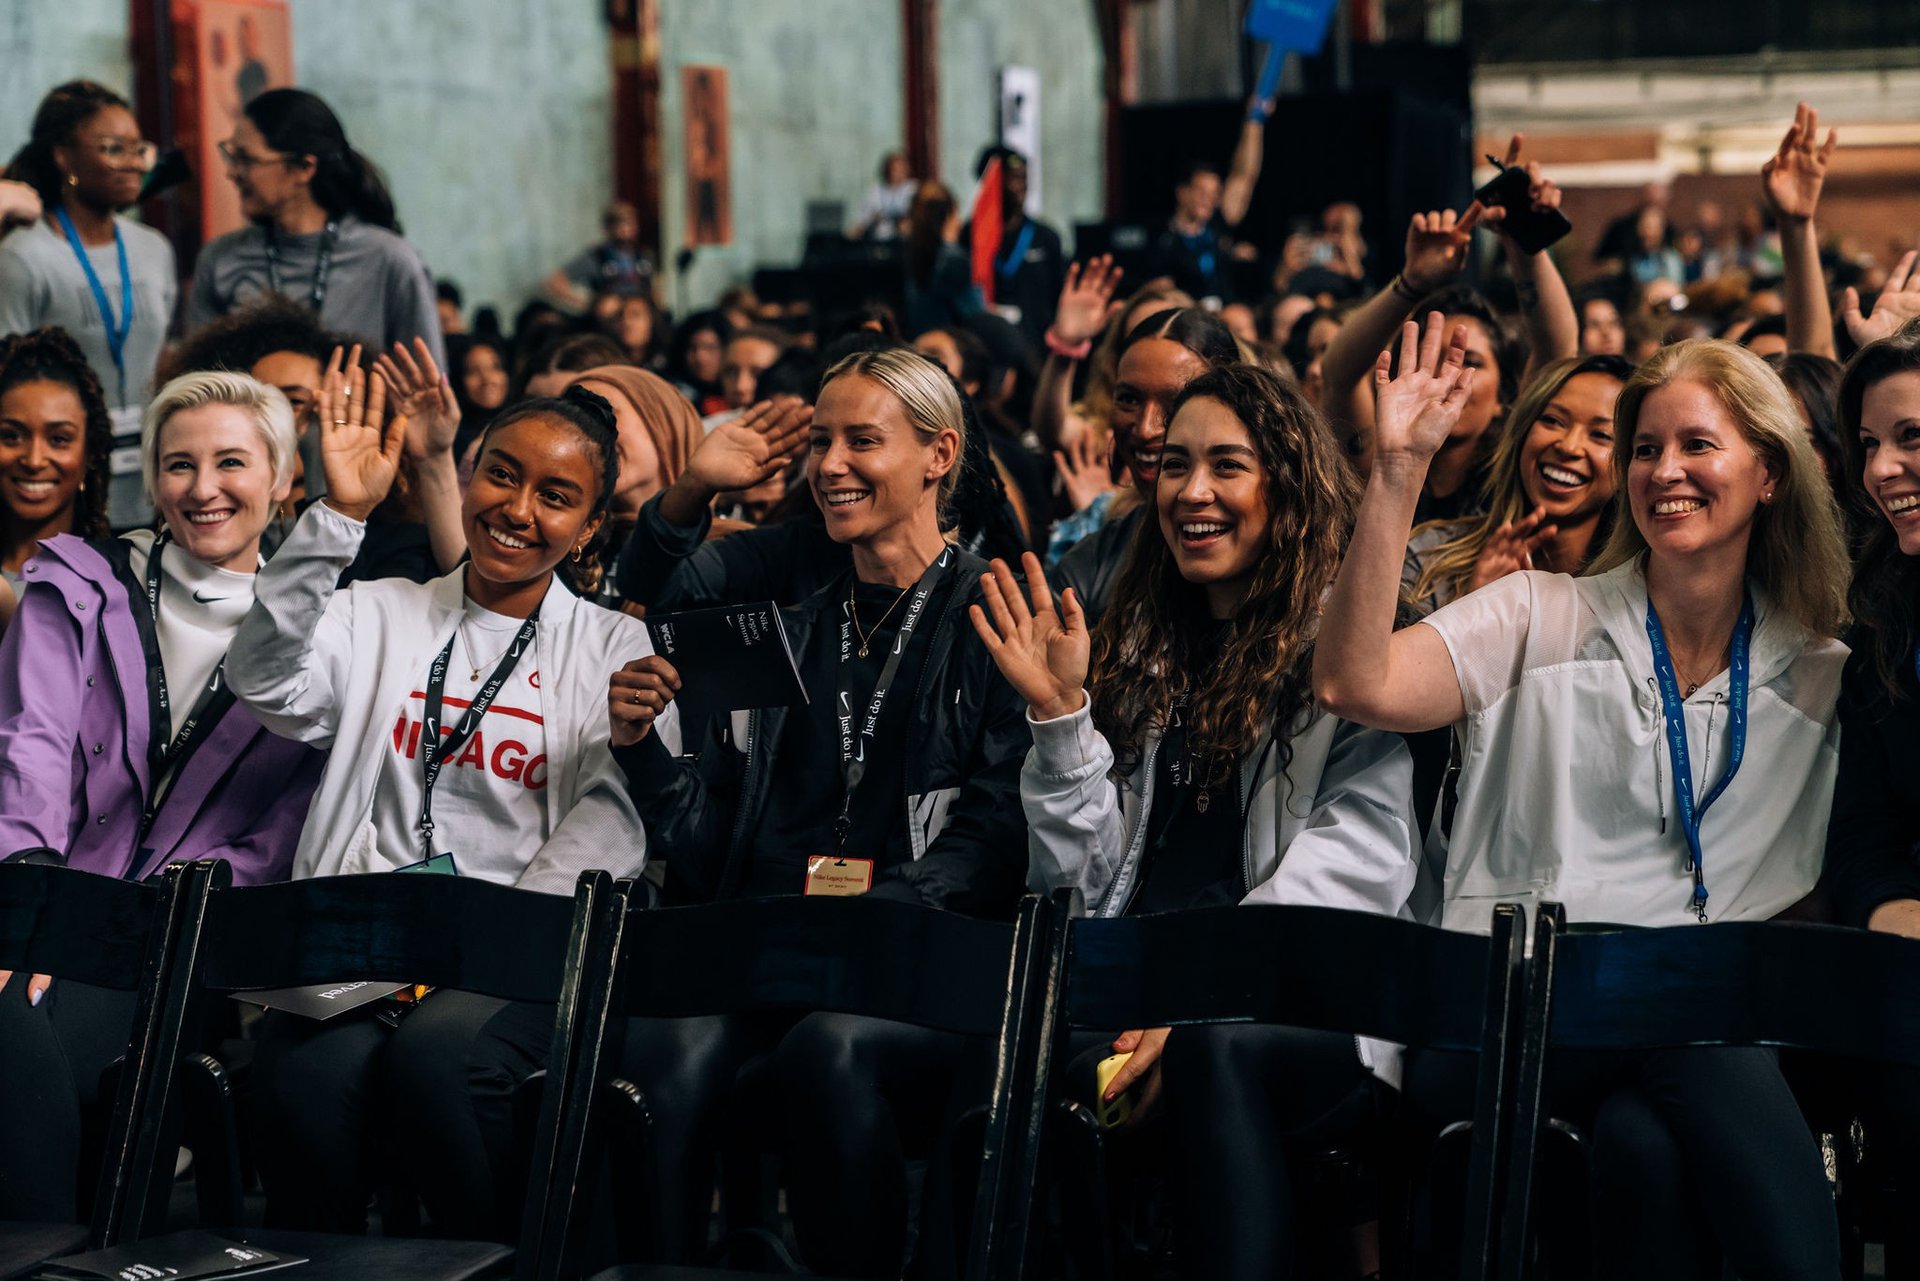 Coaches-in-training at Nike Women Coach LA, an event with the purpose of empowering girls through sports. 